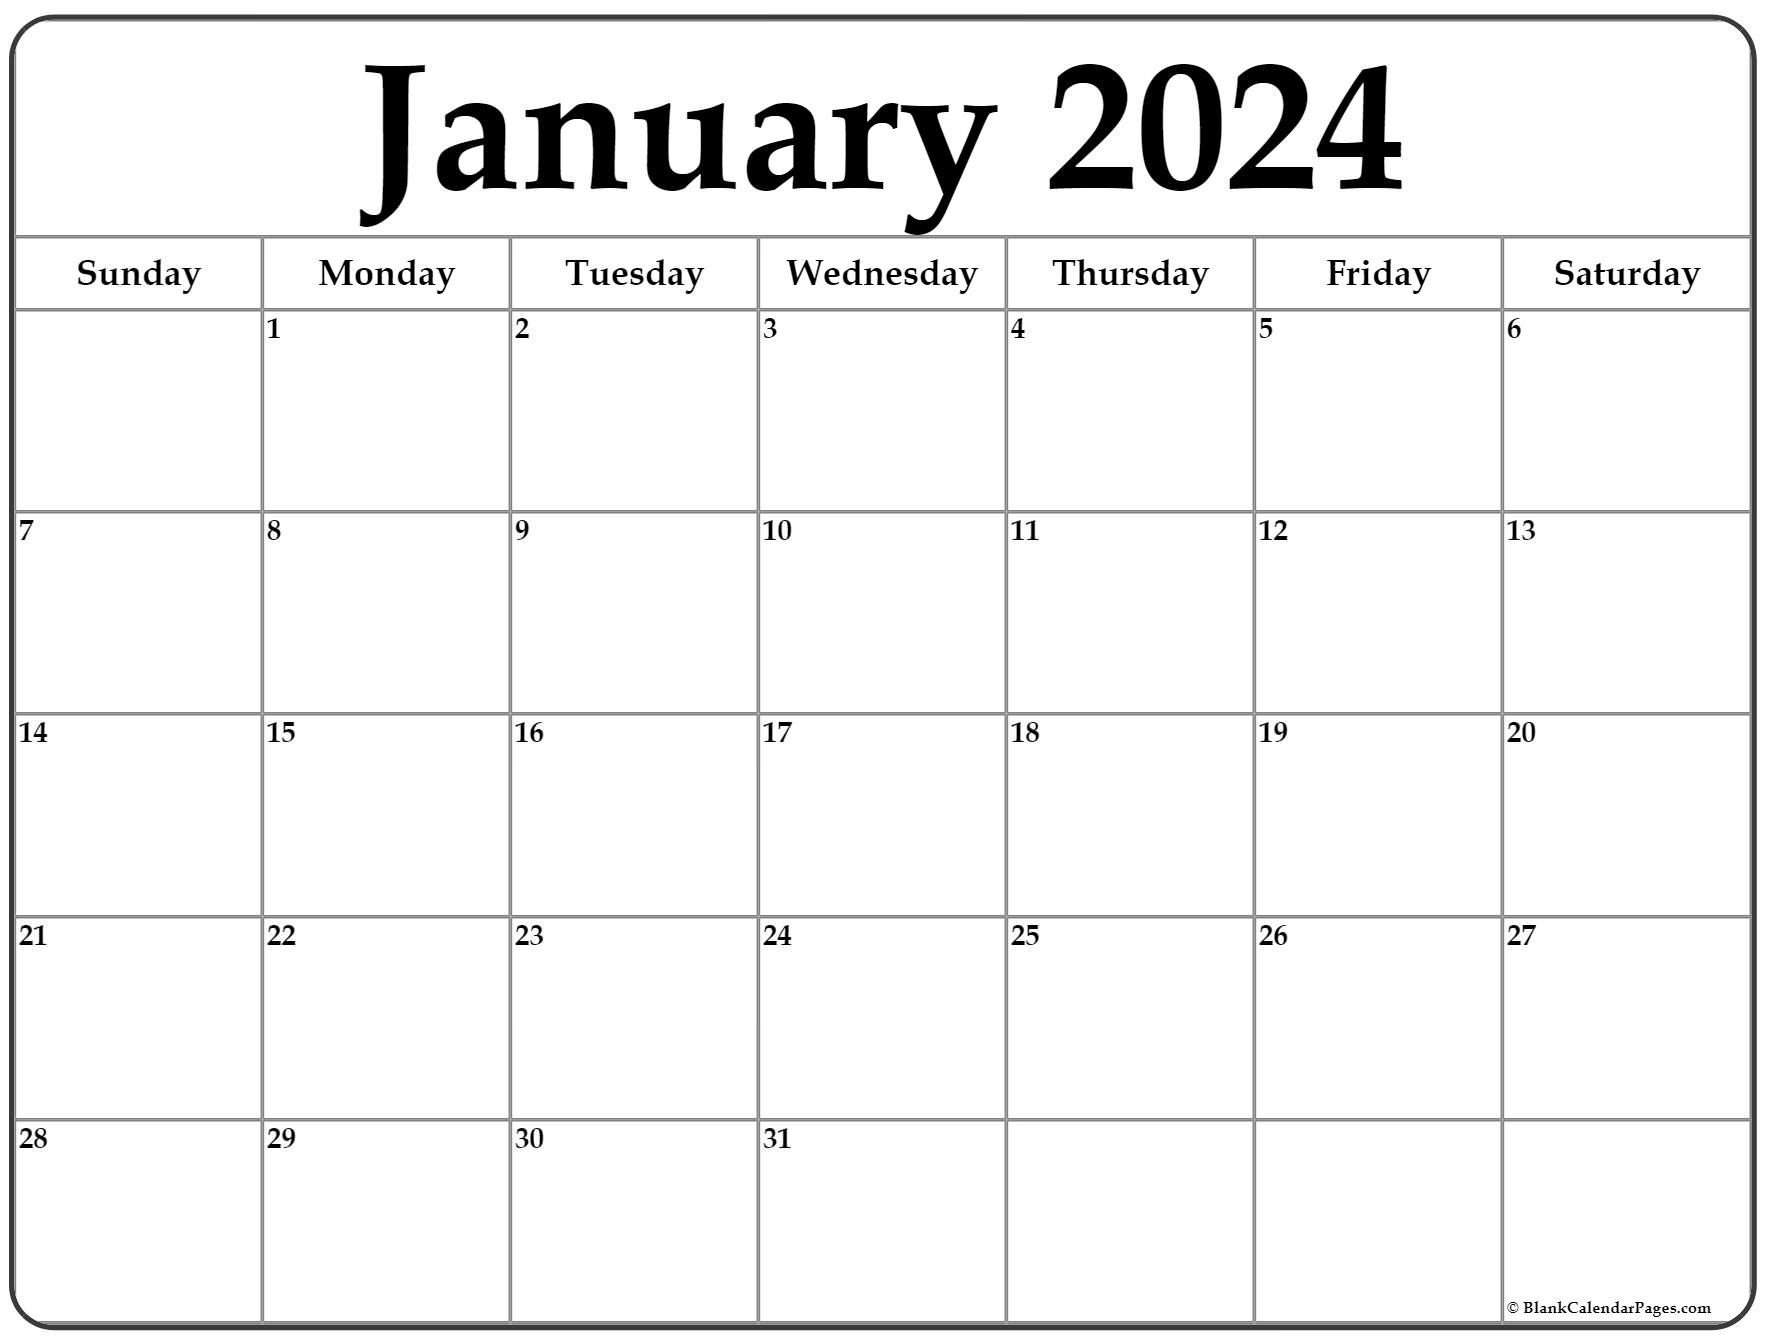 2023 United States Calendar With Holidays 2023 Calendar Templates And Images Delilah Espinoza